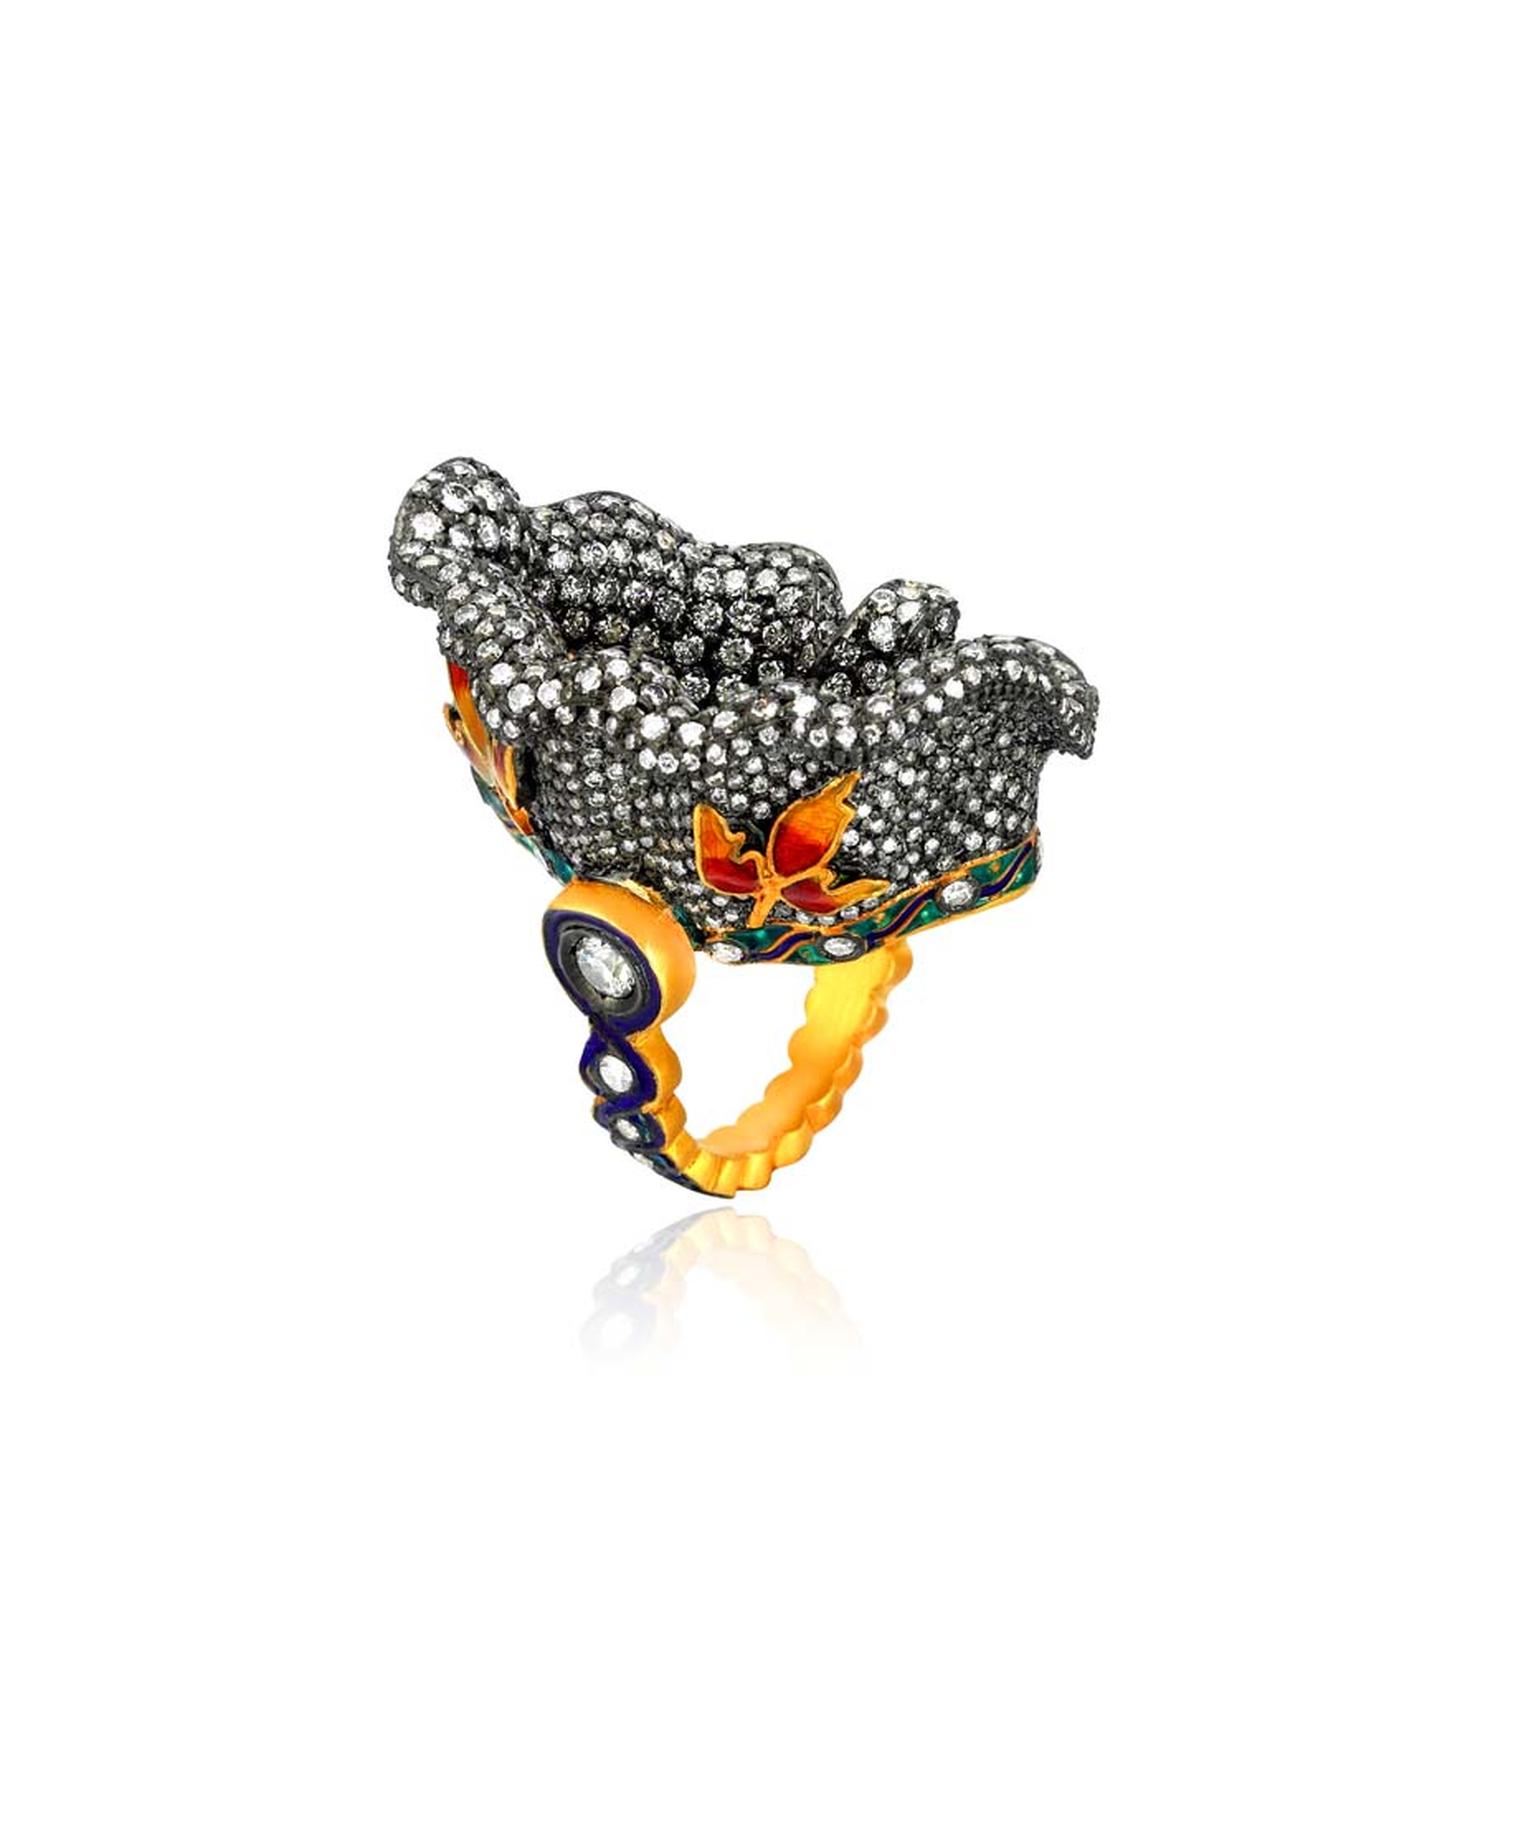 Pinar Oner Chora ring is inspired by the outstanding 14th century Byzantine mosaics of Istanbul's Chora church.